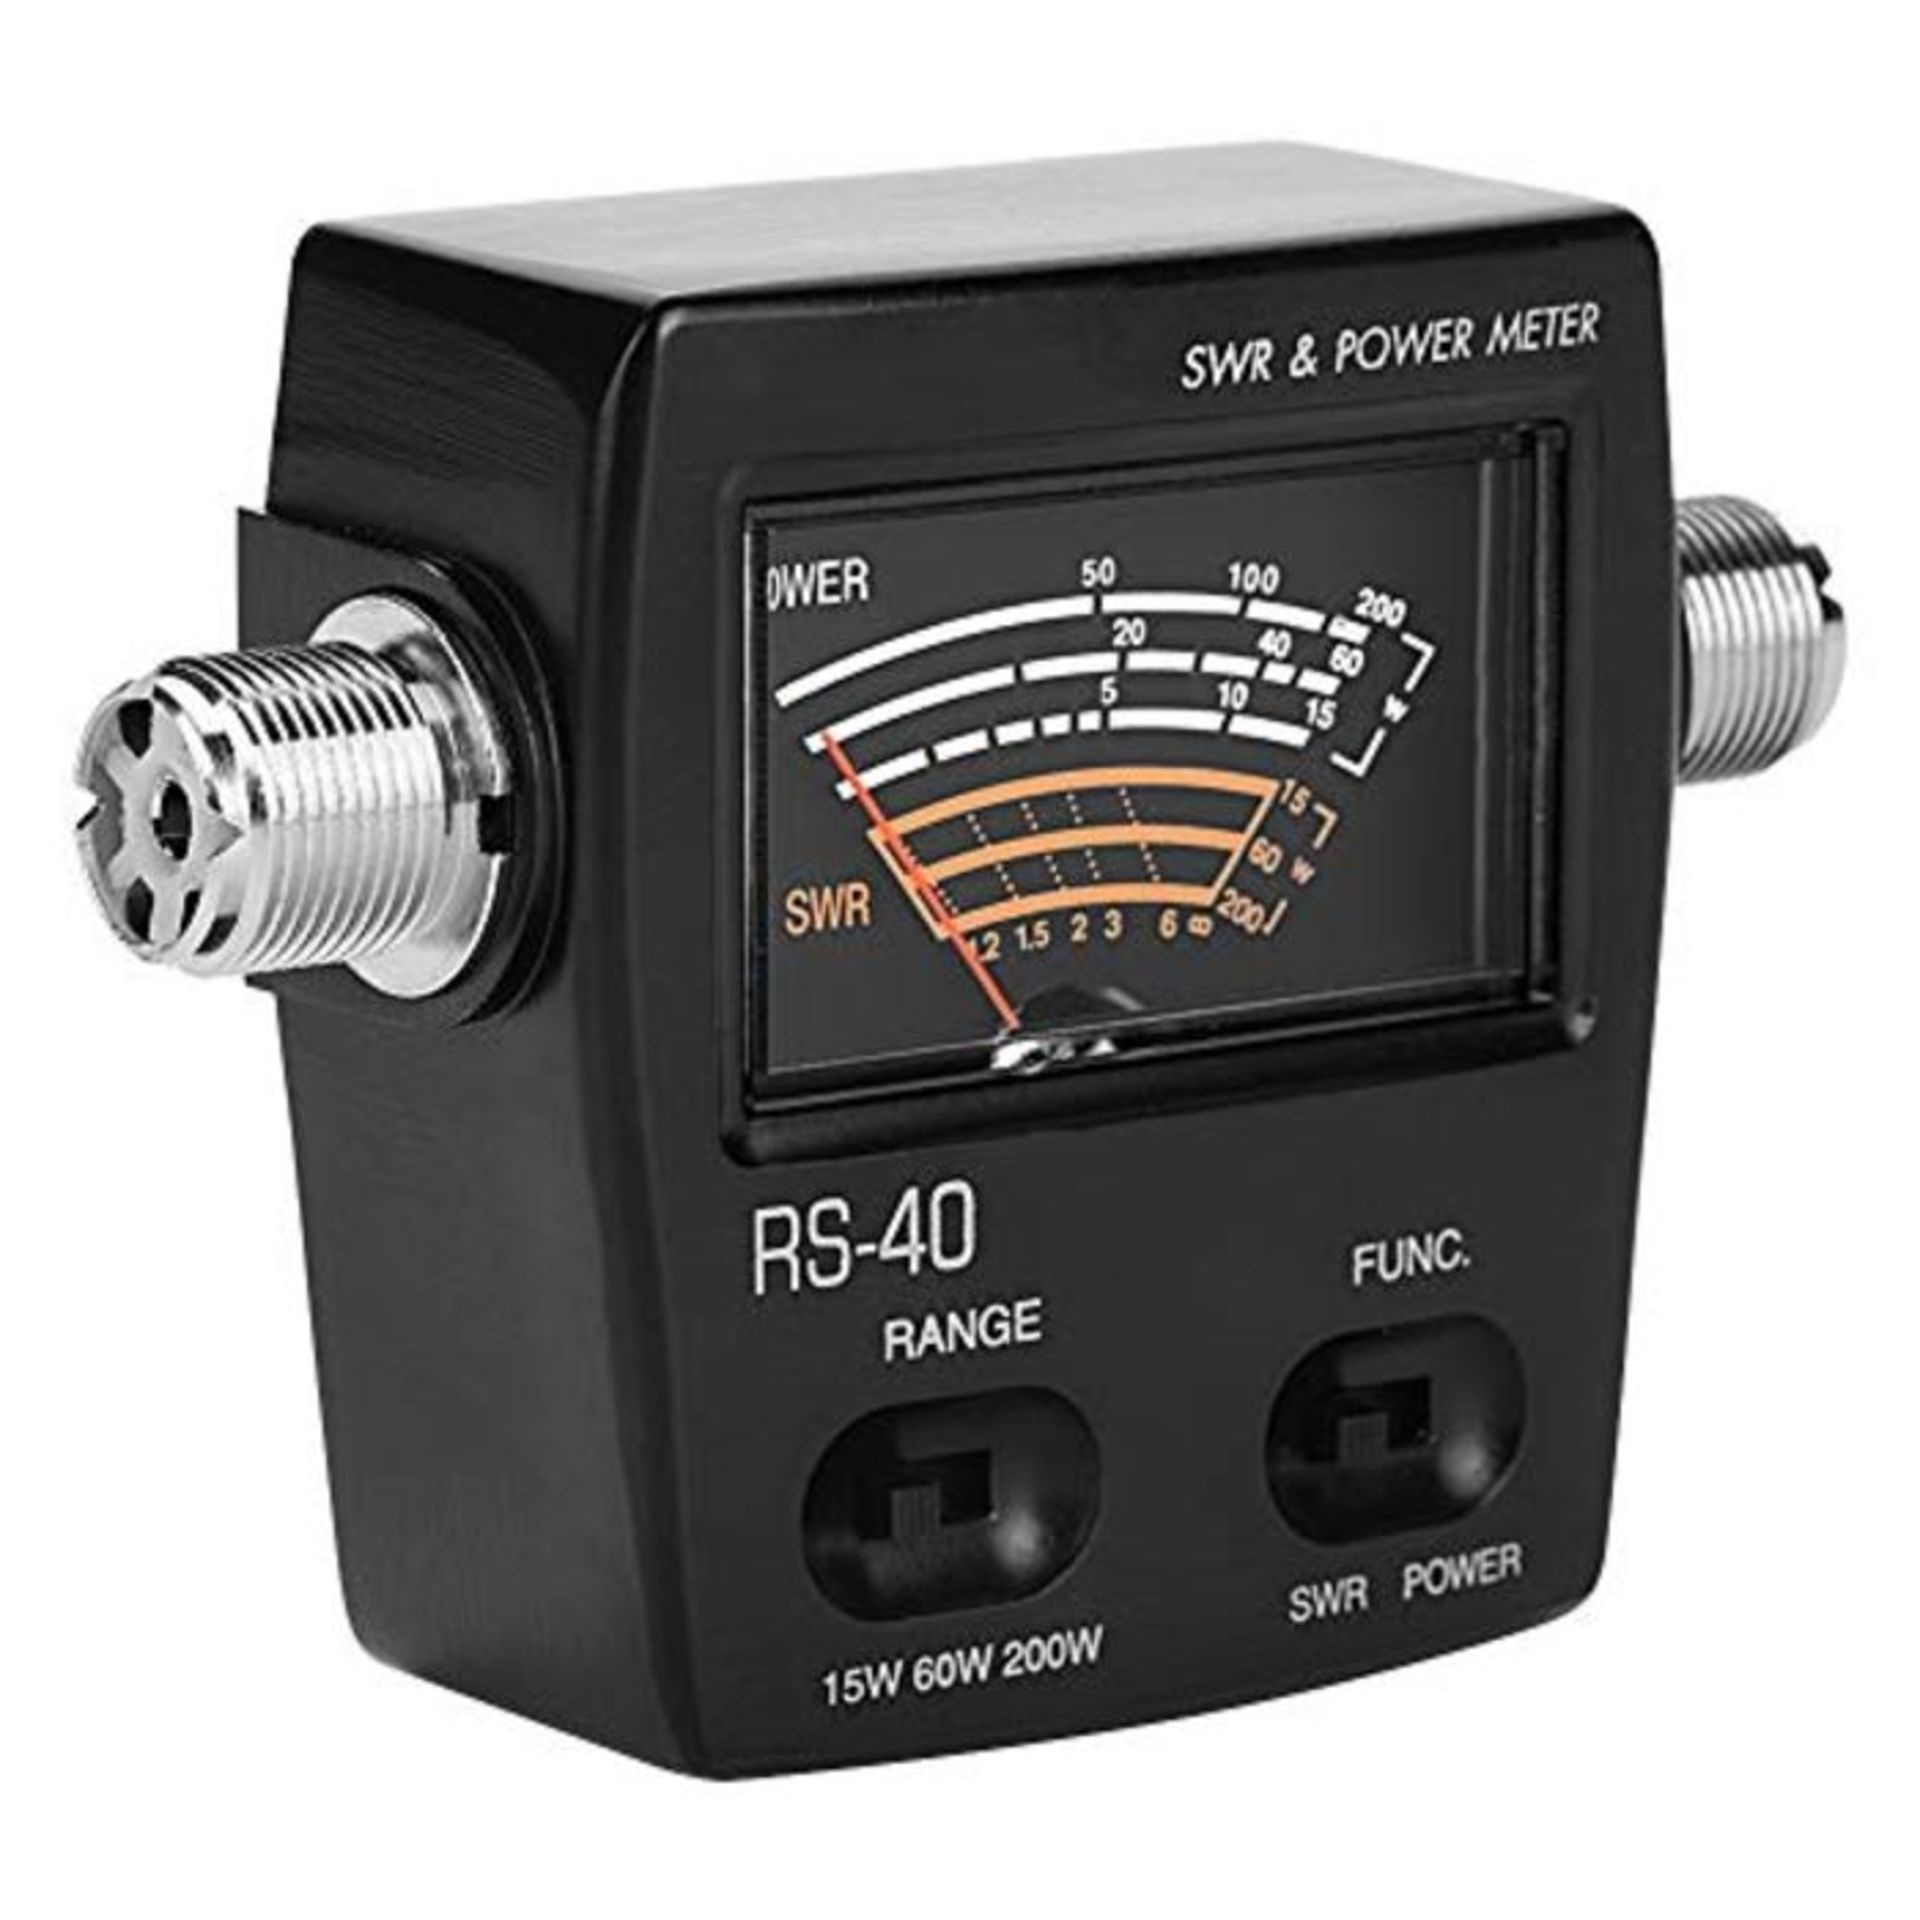 Professional UV Dual Band Standing-Wave Meter Power Meter SWR/Power Meter, Highly Accu